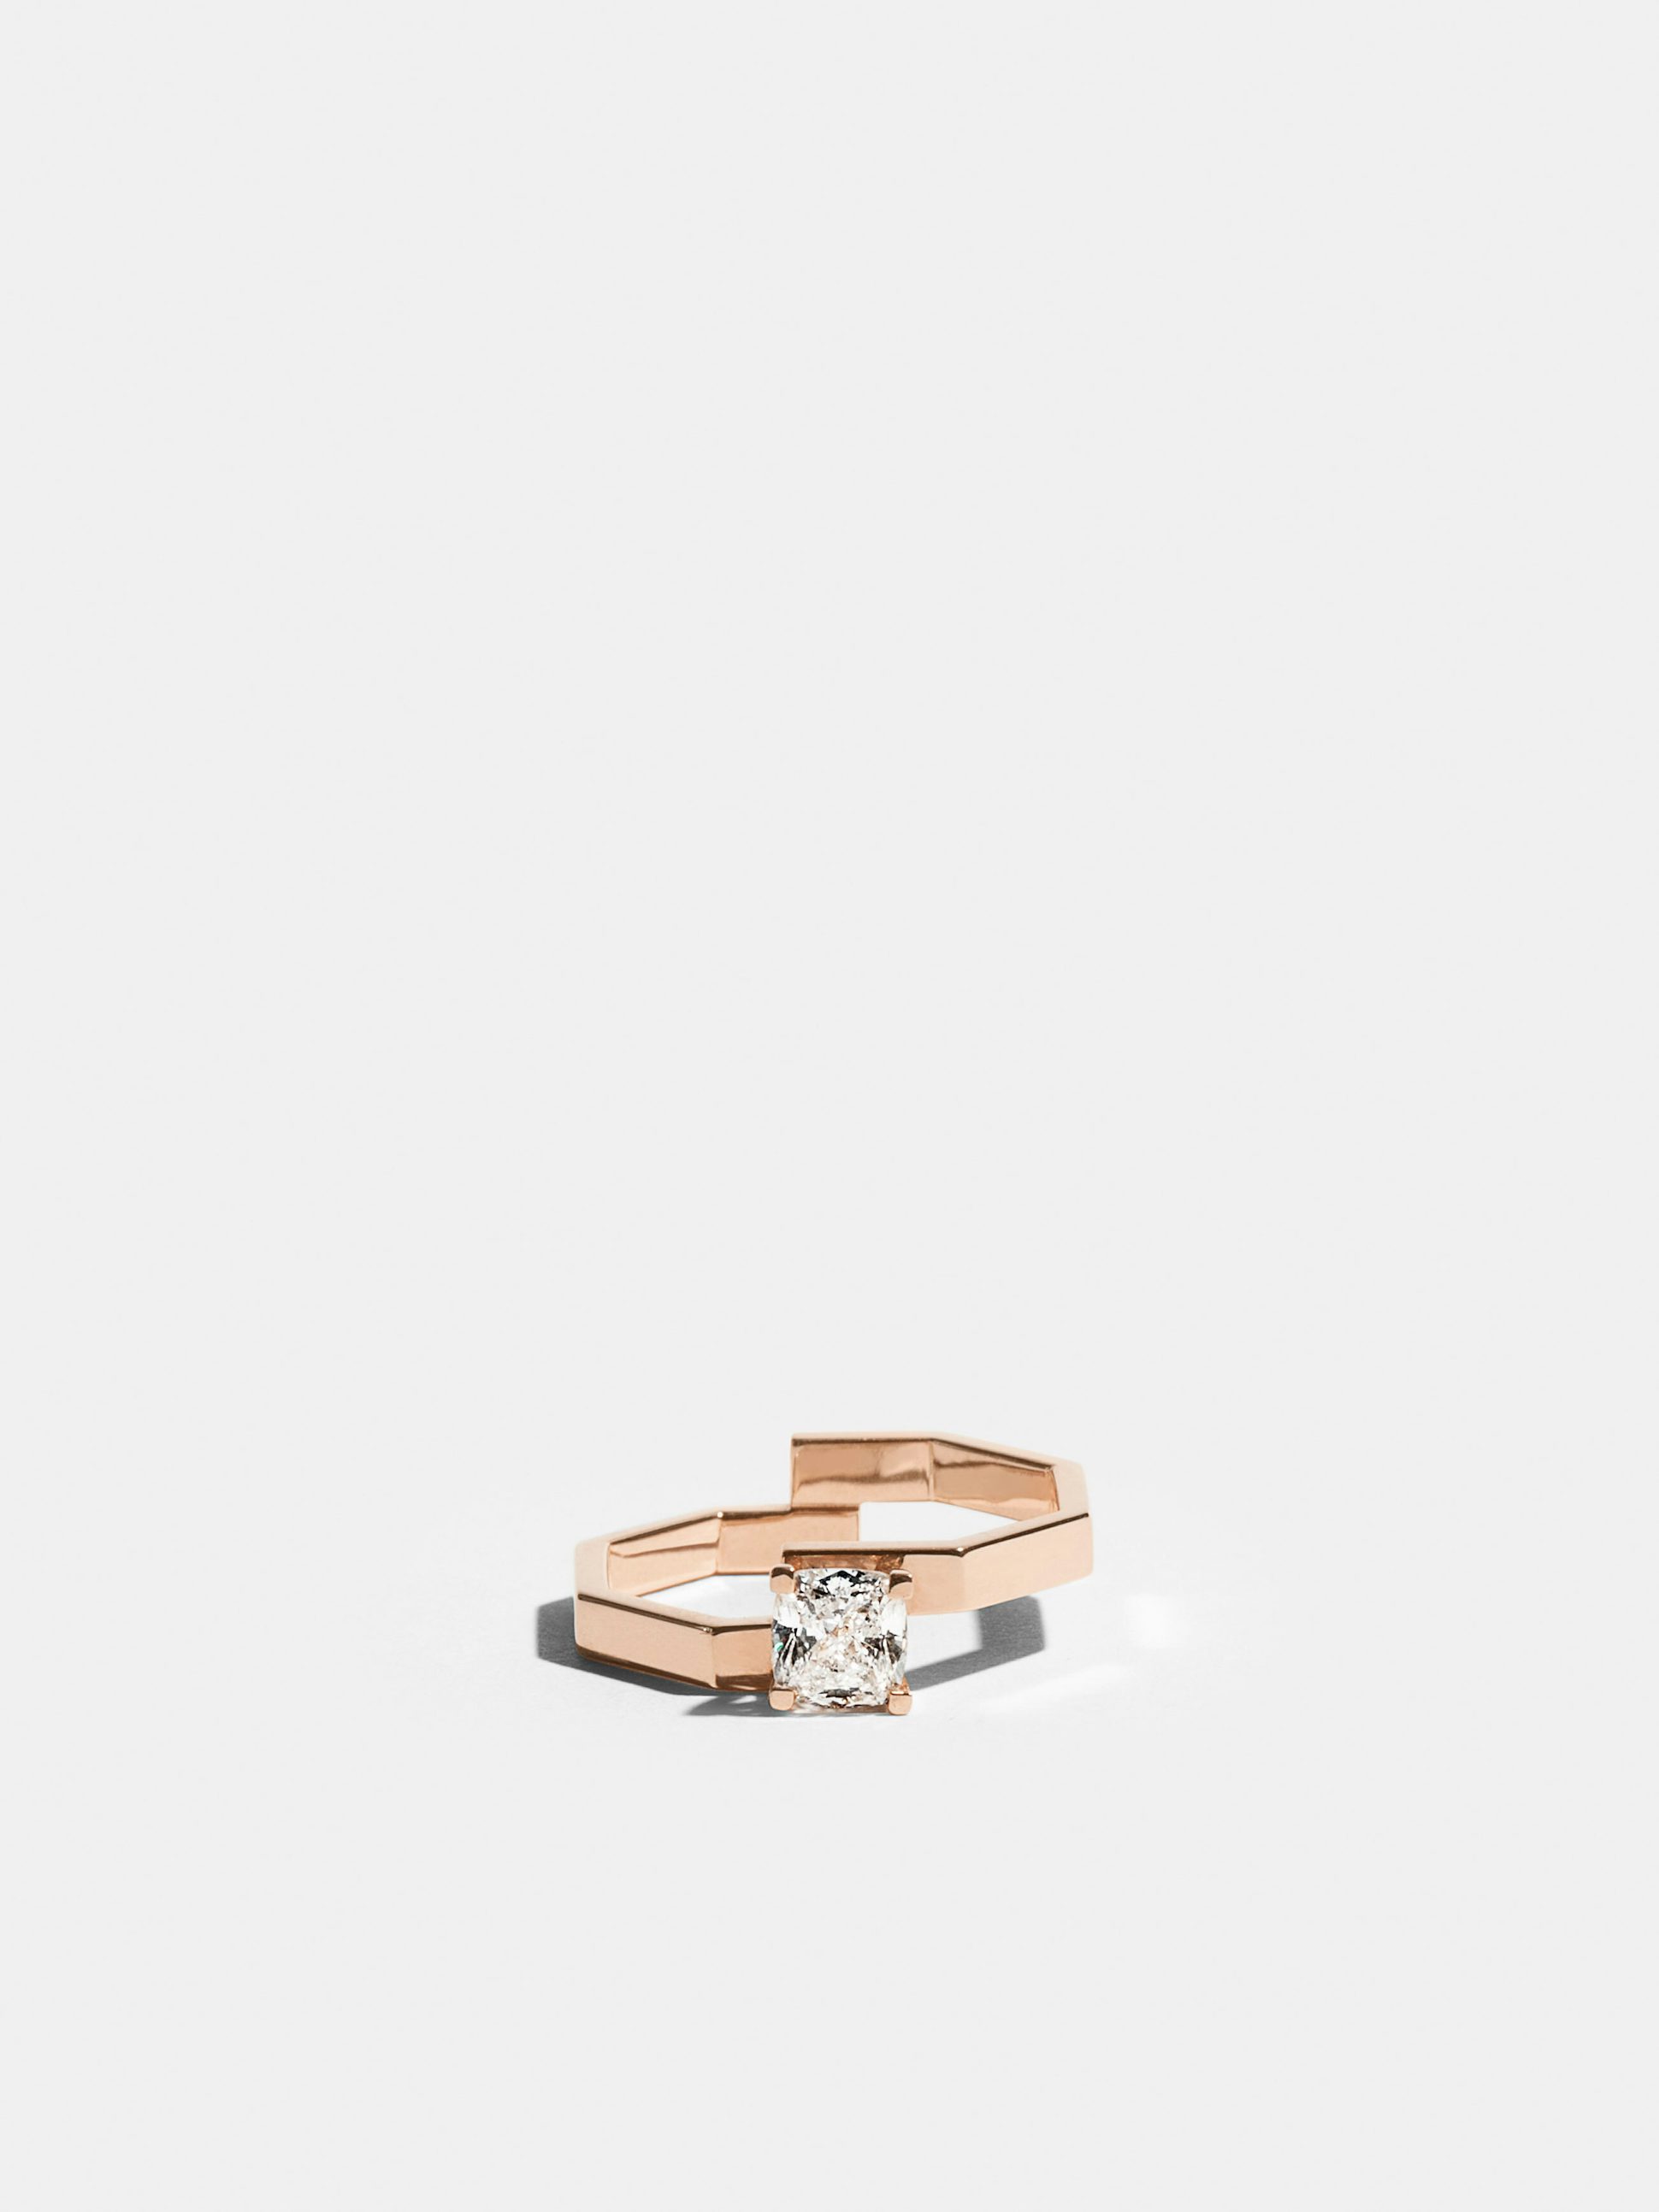 Solitaire Octogone in 18k Fairmined ethical rose gold set with a 0.7 carat cushion cut lab-grown diamond (GVS quality)